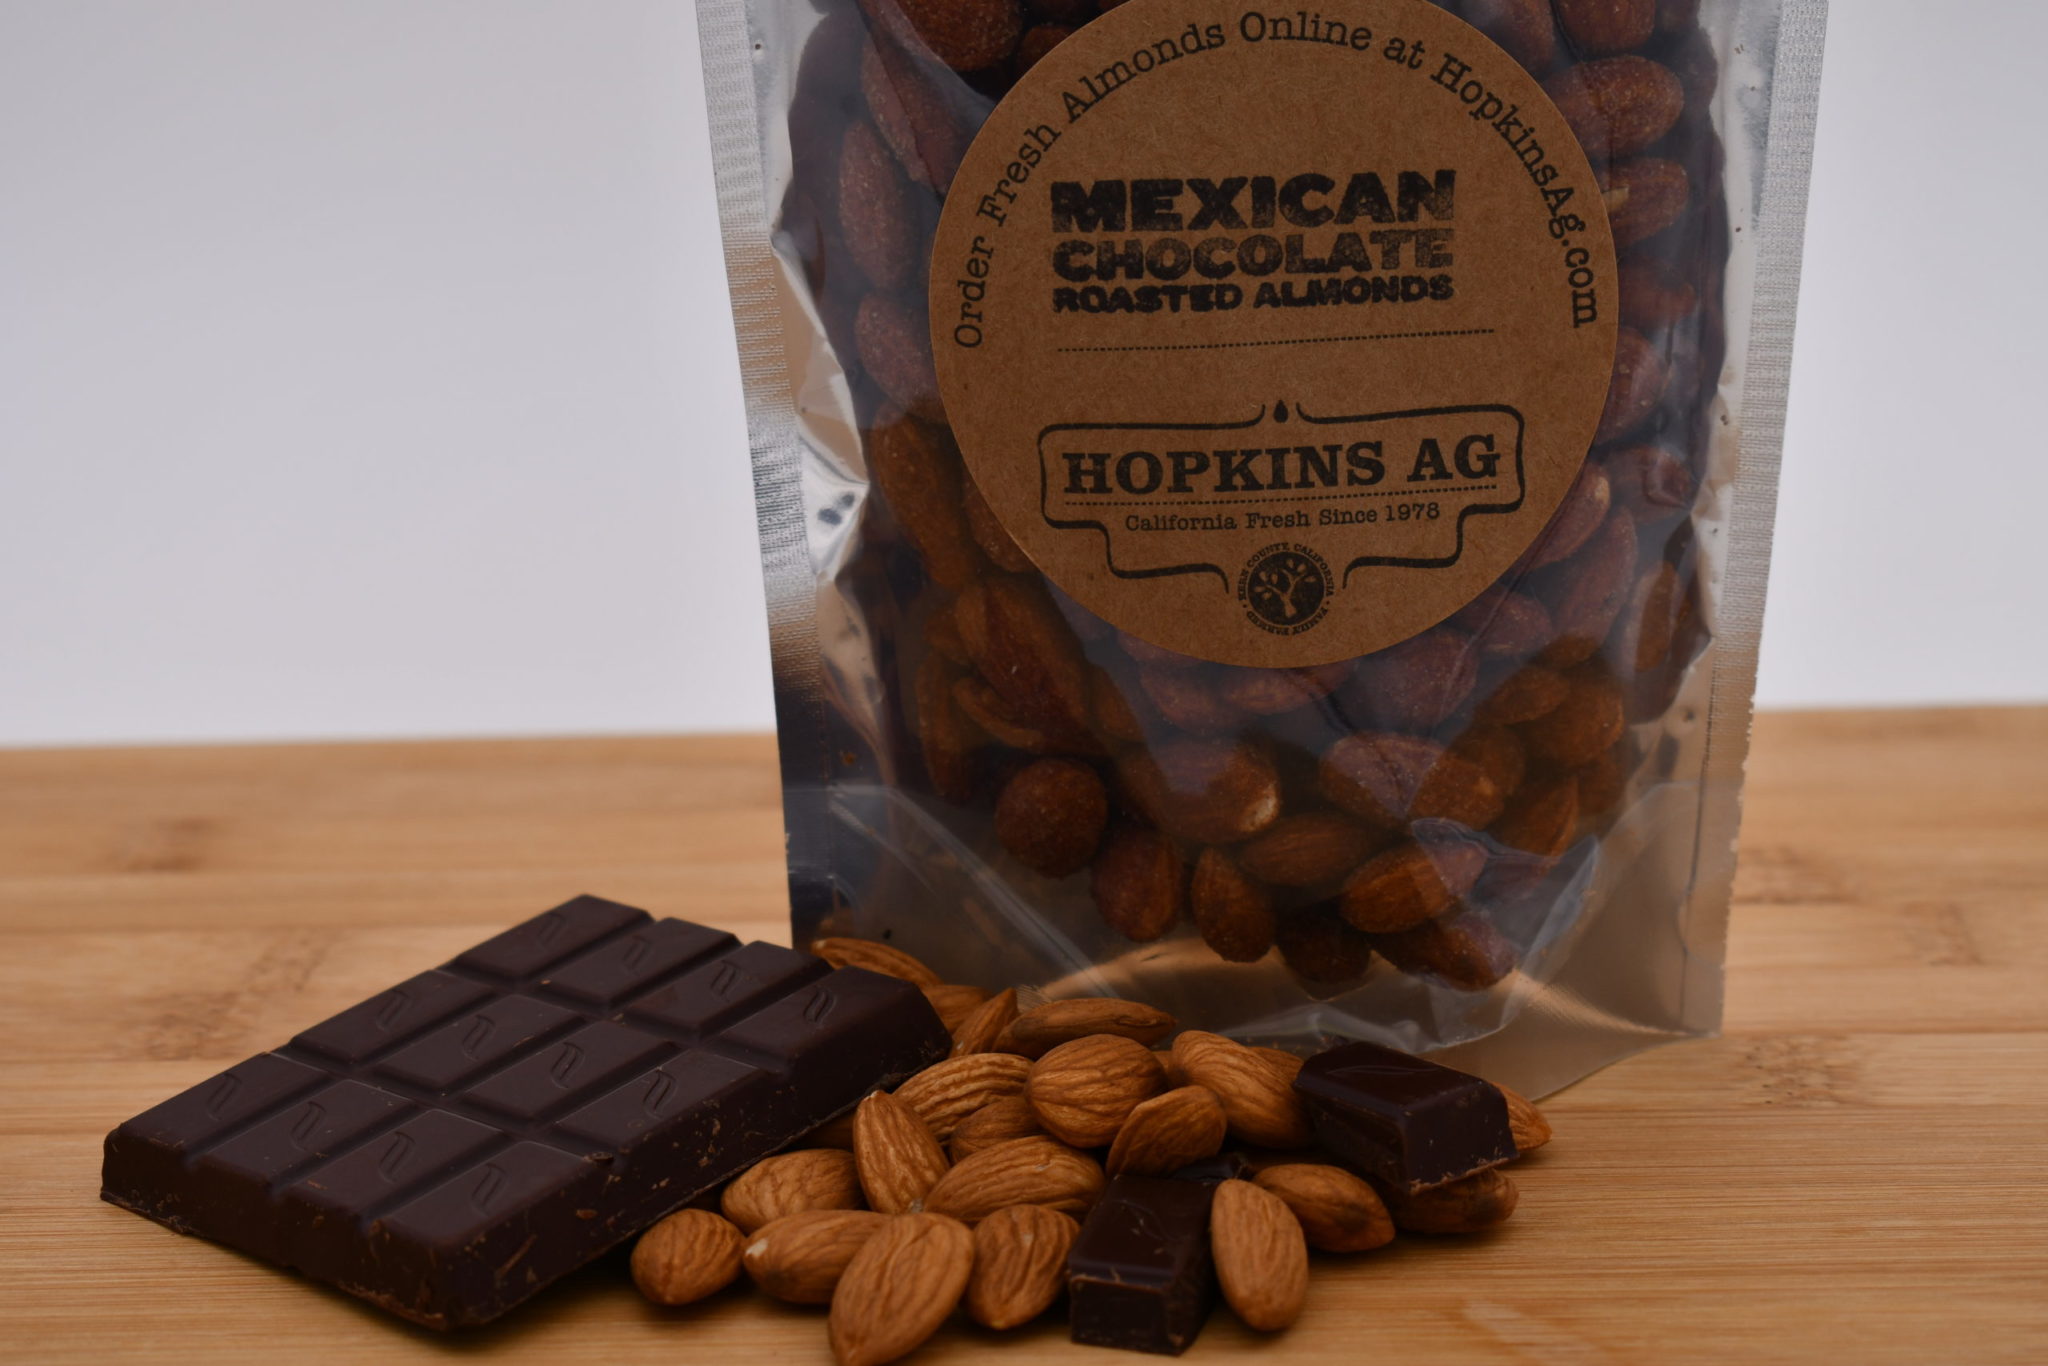 Mexican Chocolate Almonds | The Market | Daily Harvest Express